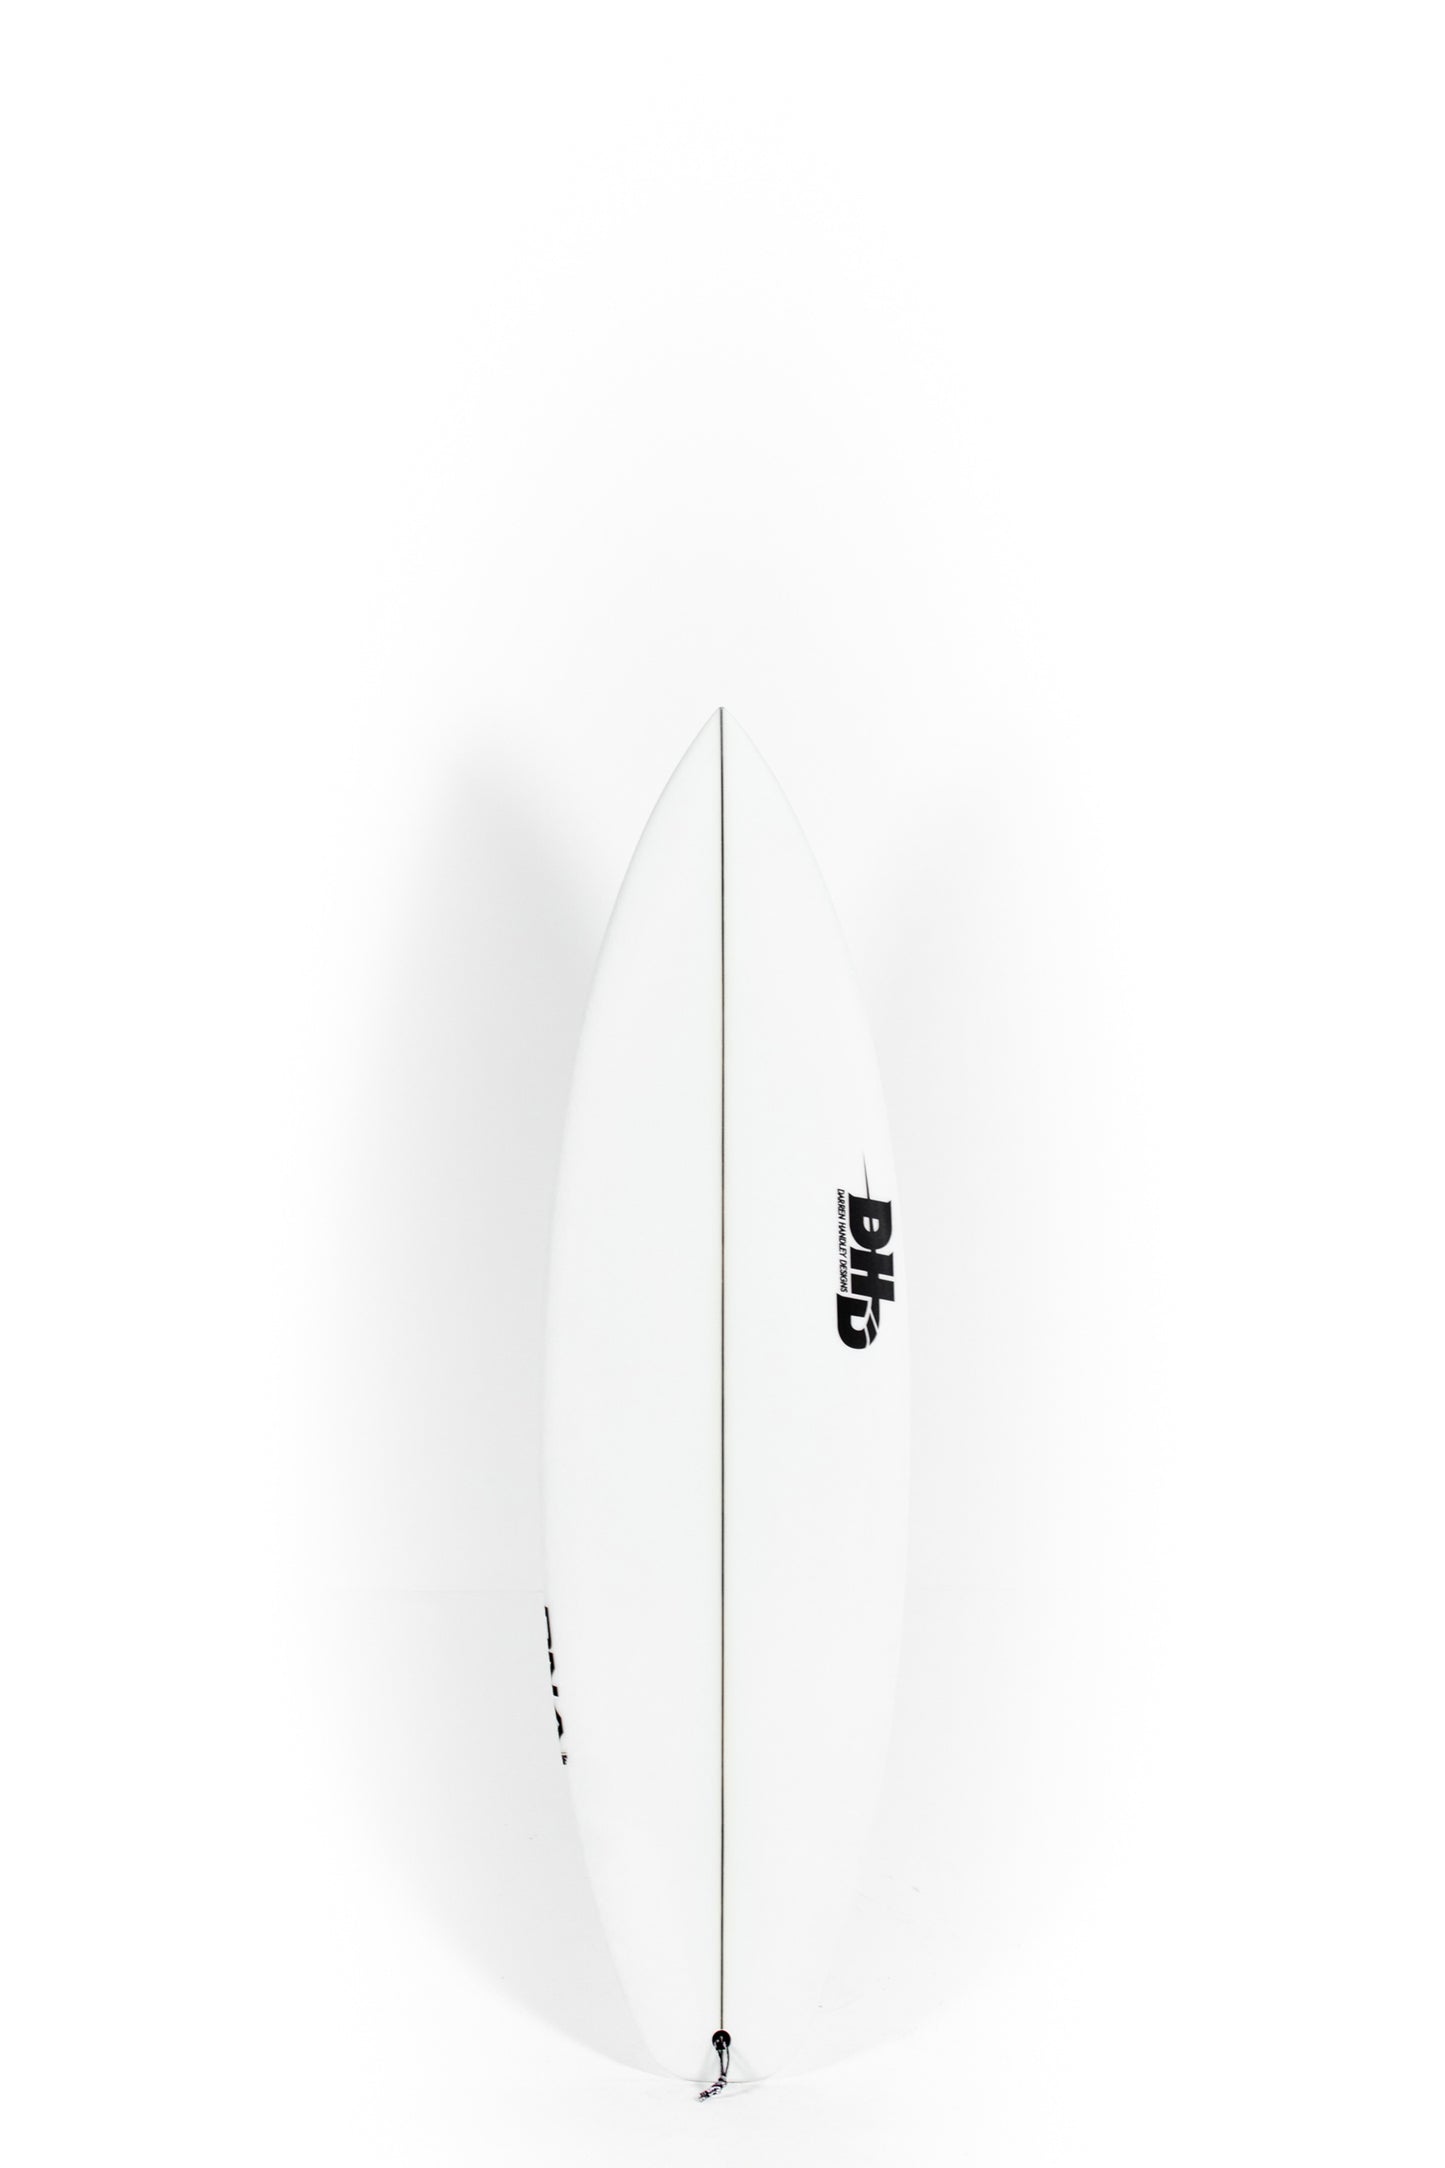 Pukas-Surf-Shop-DHD-Surfboards-DNA